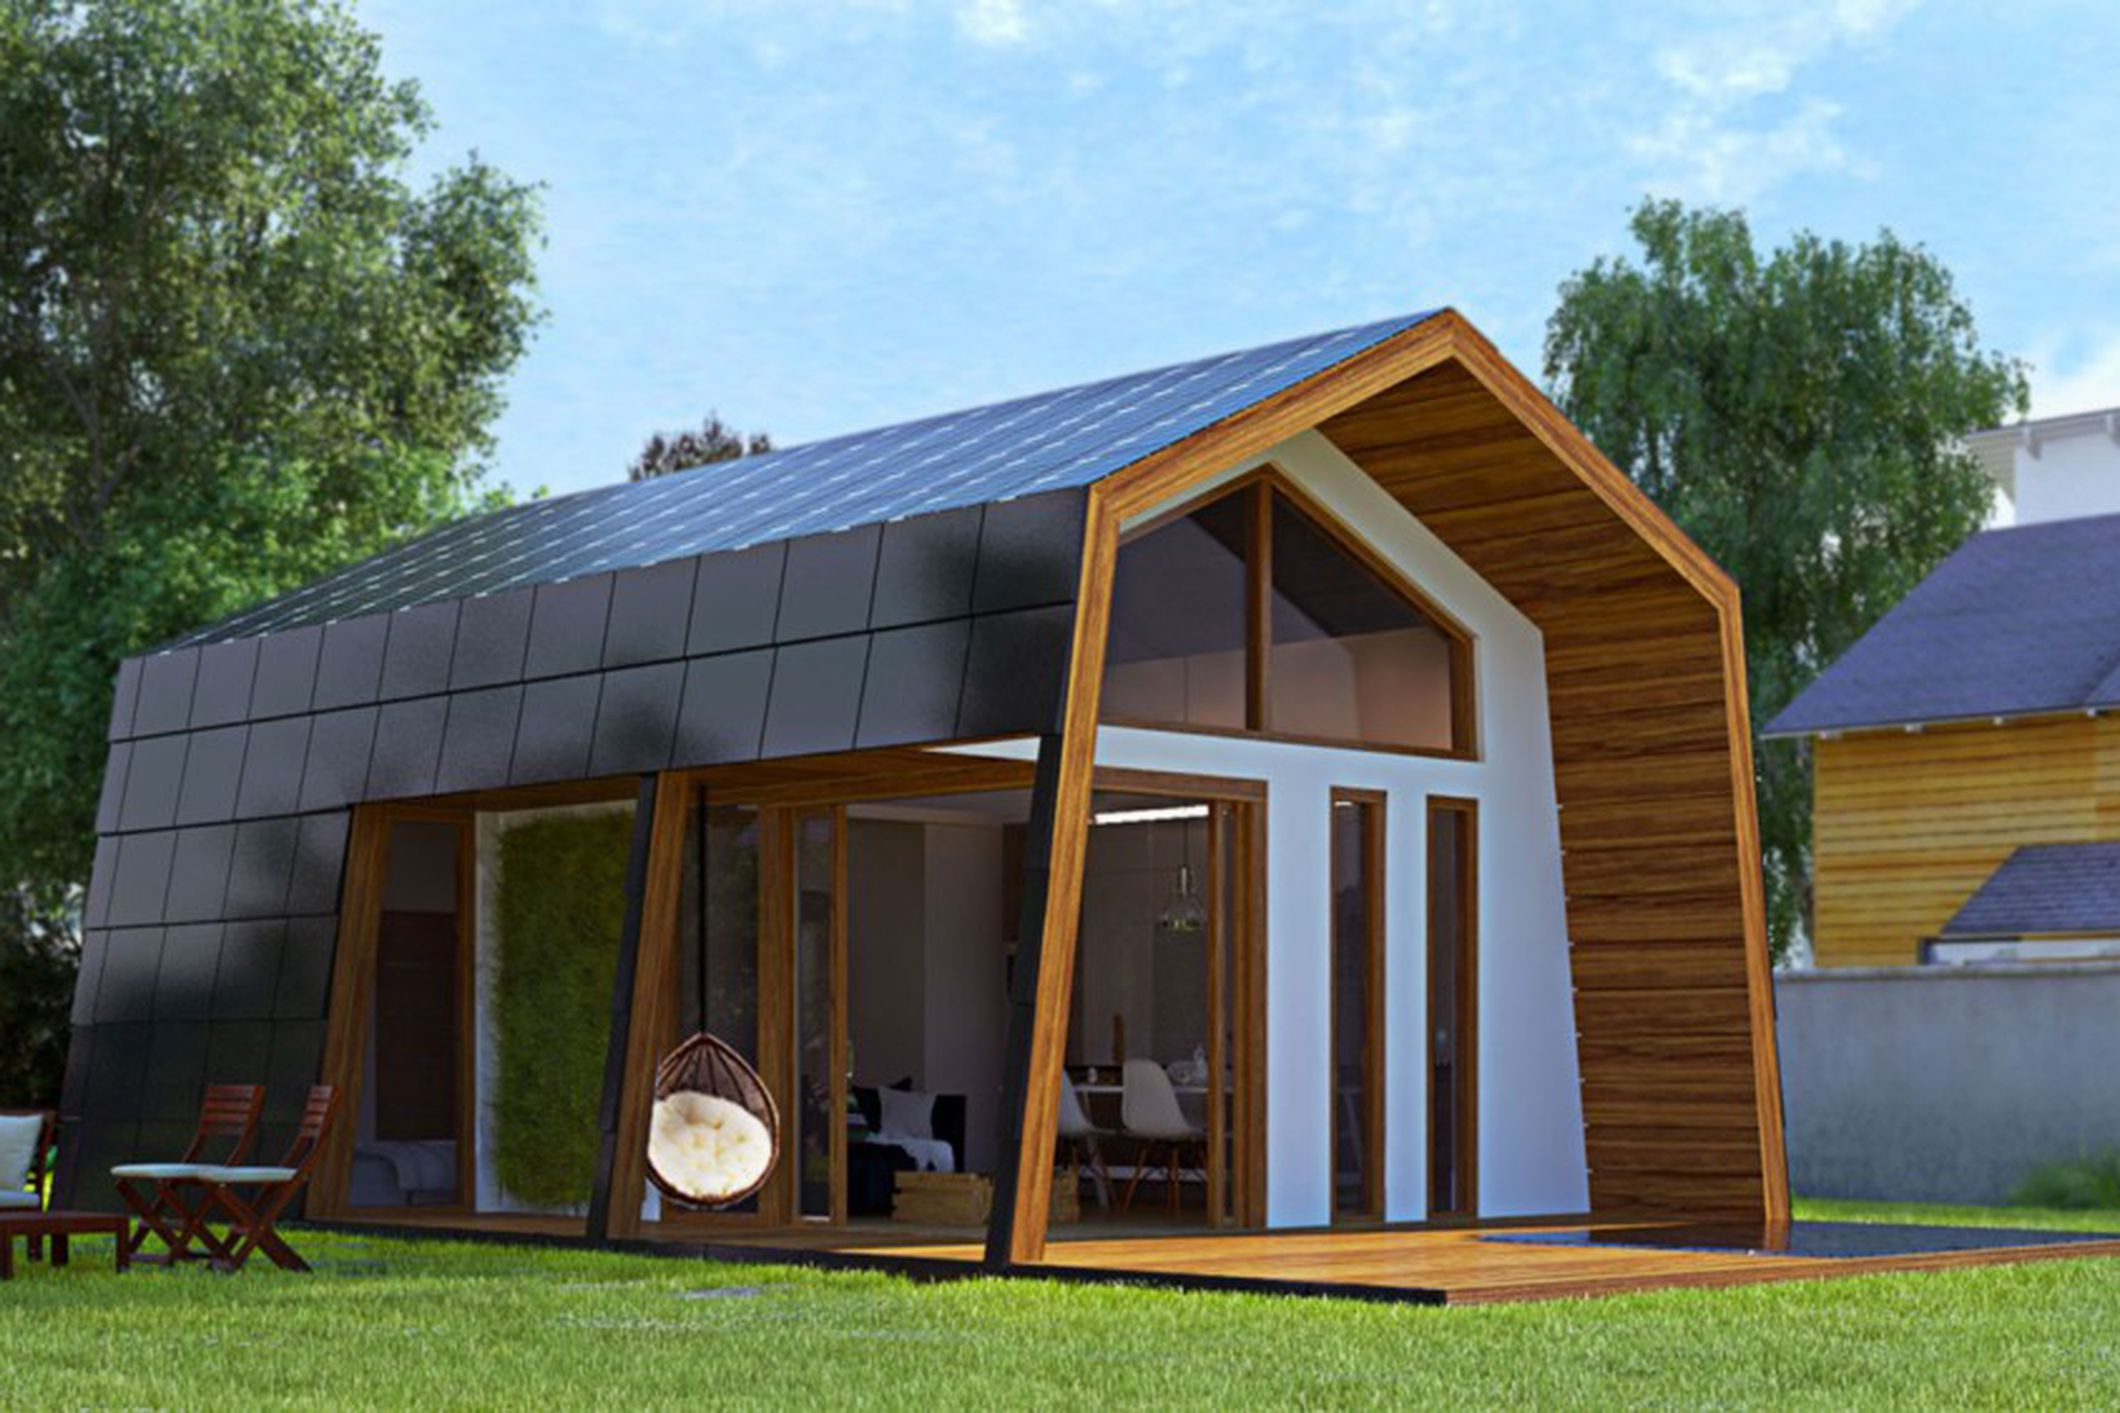 DIY Home Kits
 Ecokit s prefab cabin is sustainable home you can assemble